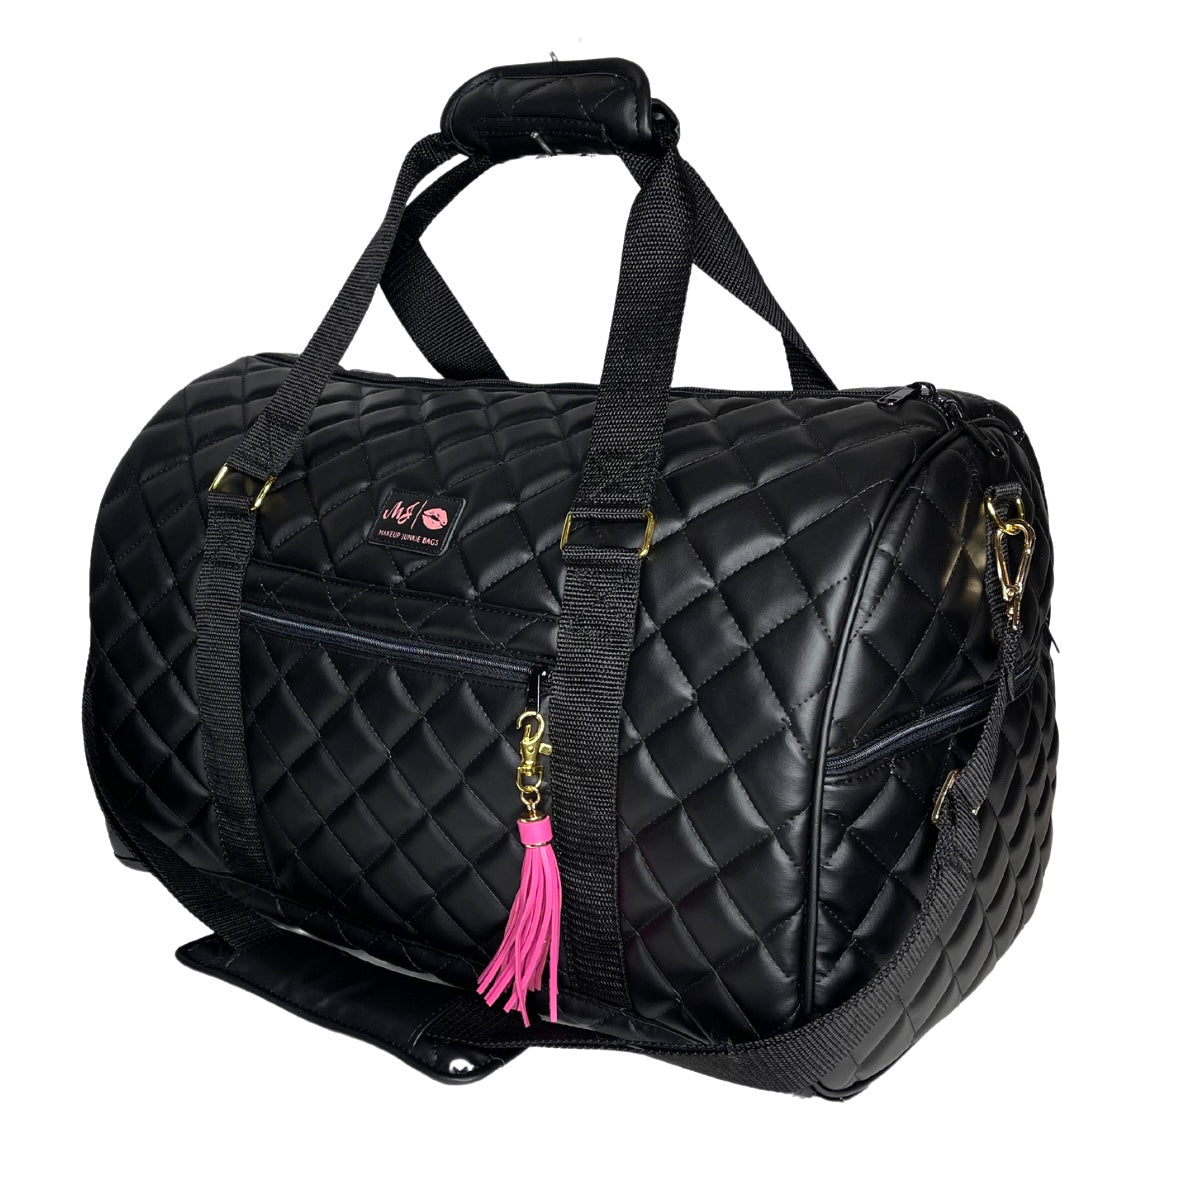 Live Takeover: Quilted Onyx Duffel by Makeup Junkie (Ships in 4-5 weeks)